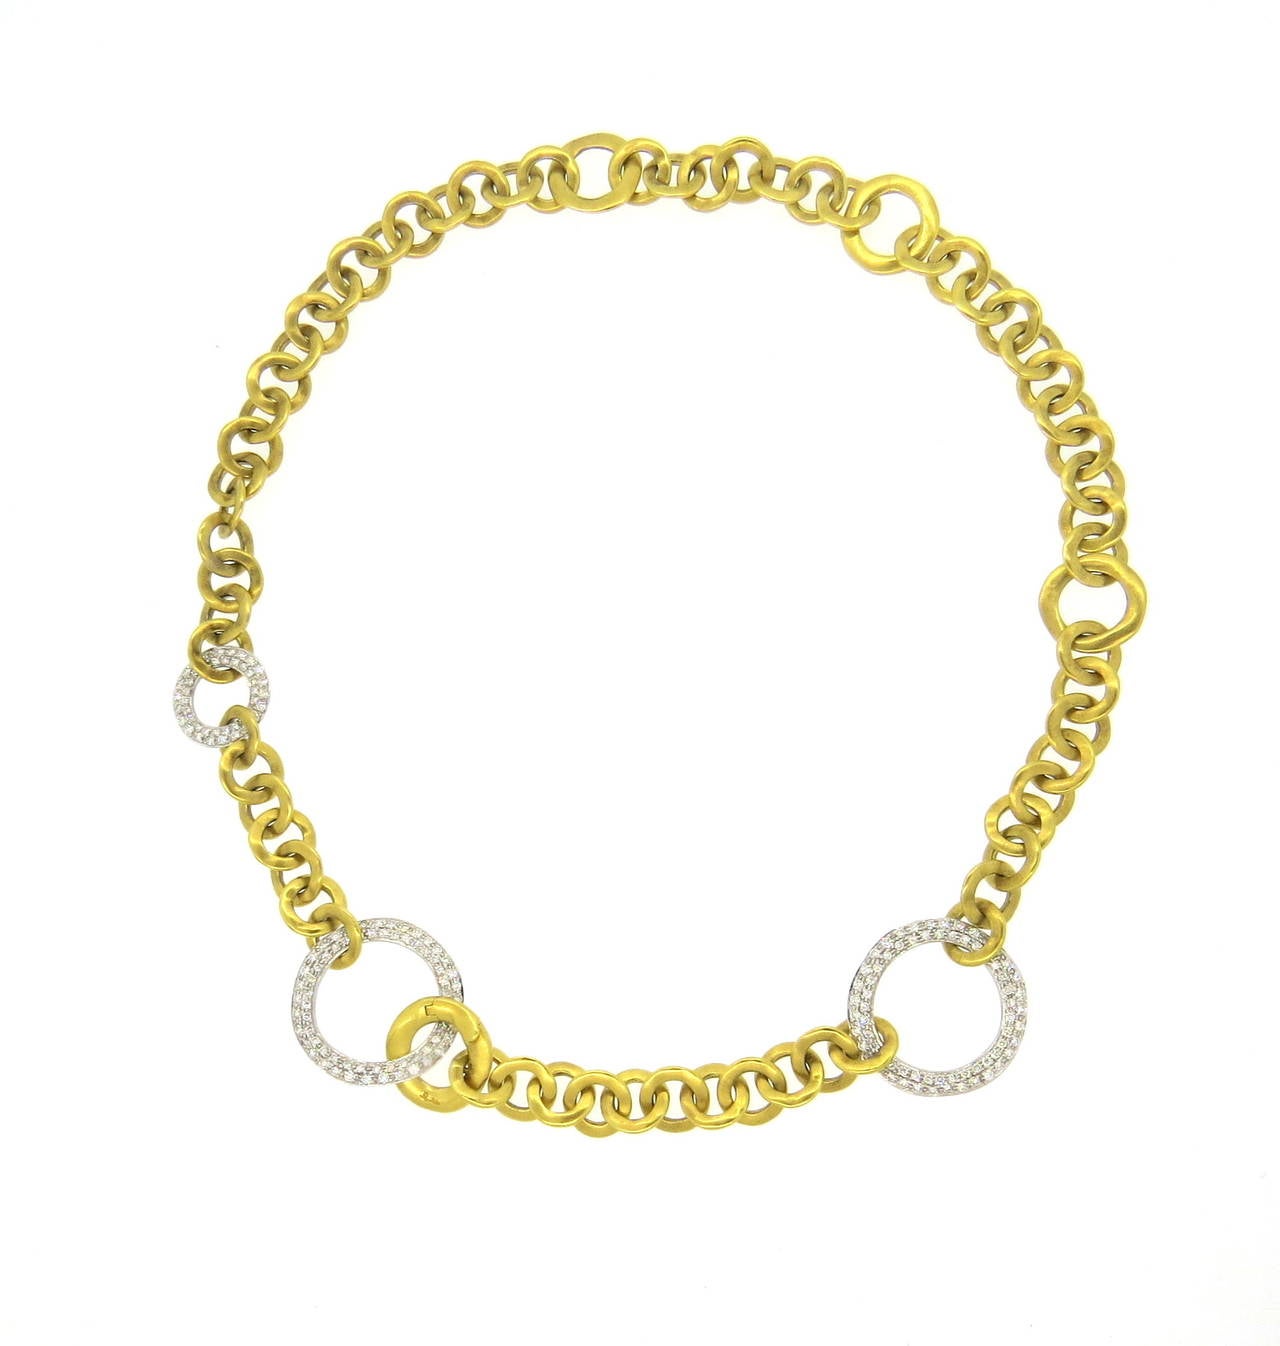 An 18k yellow gold circle link necklace, set with approximately 1.90ctw of G/VS diamonds.  Crafted by Pomellato, the necklace measures 16